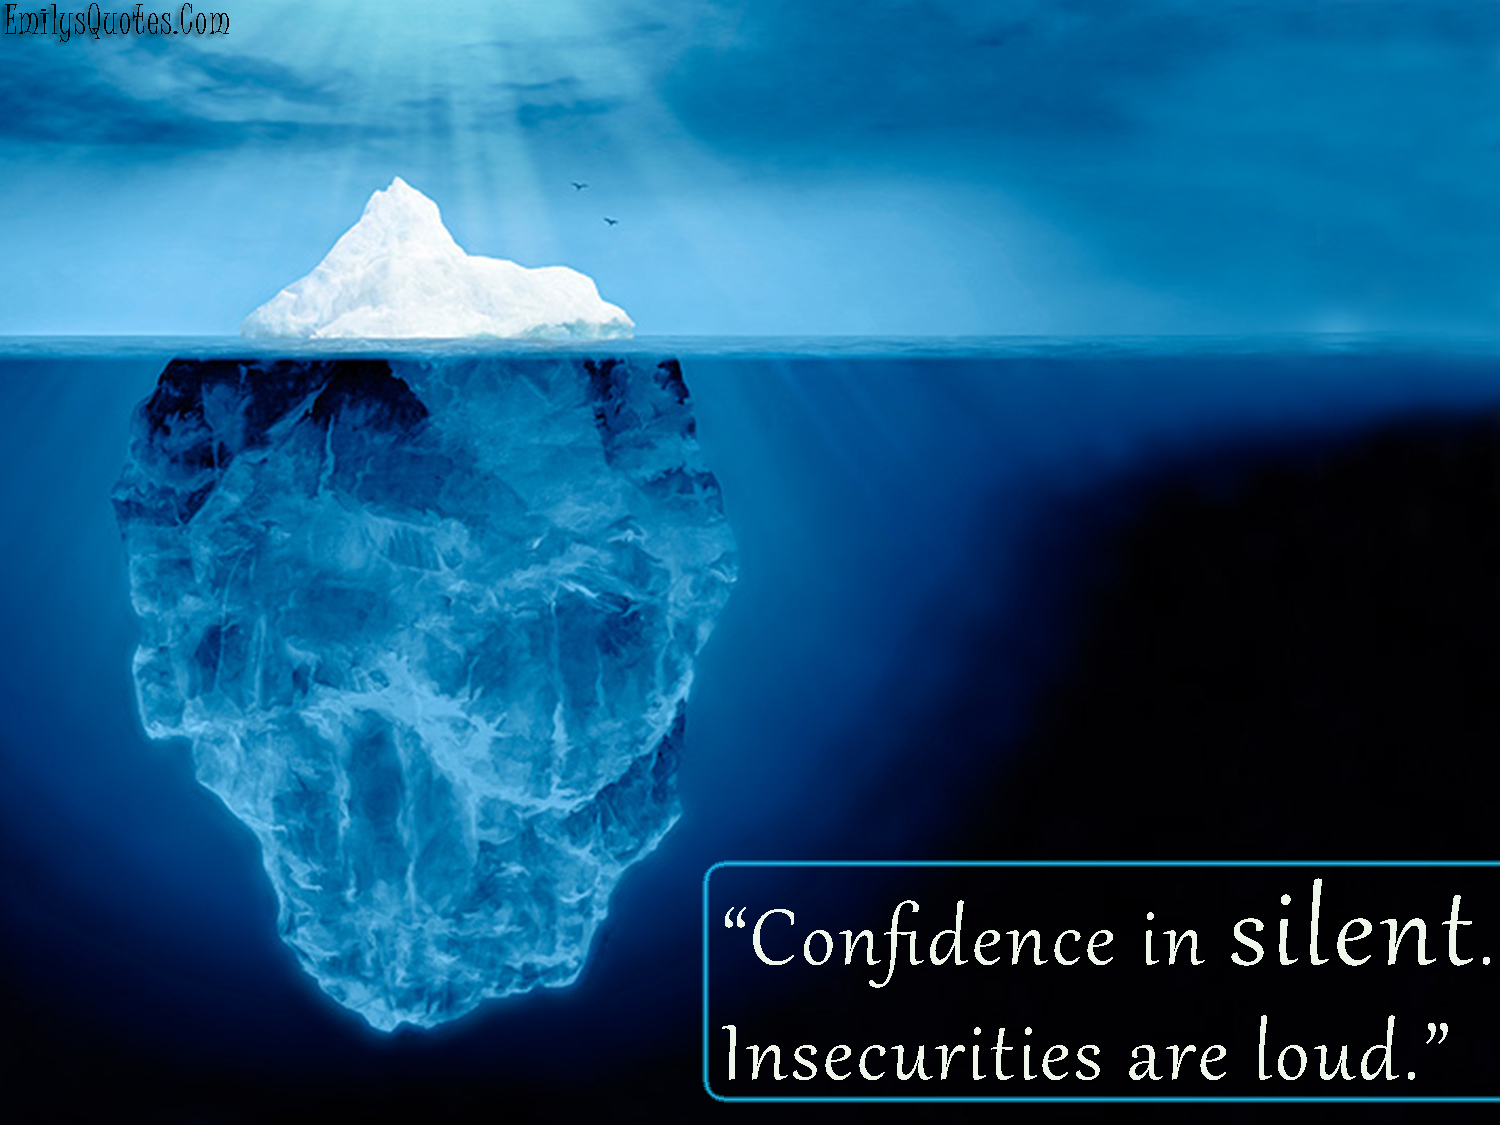 Confidence in silent. Insecurities are loud